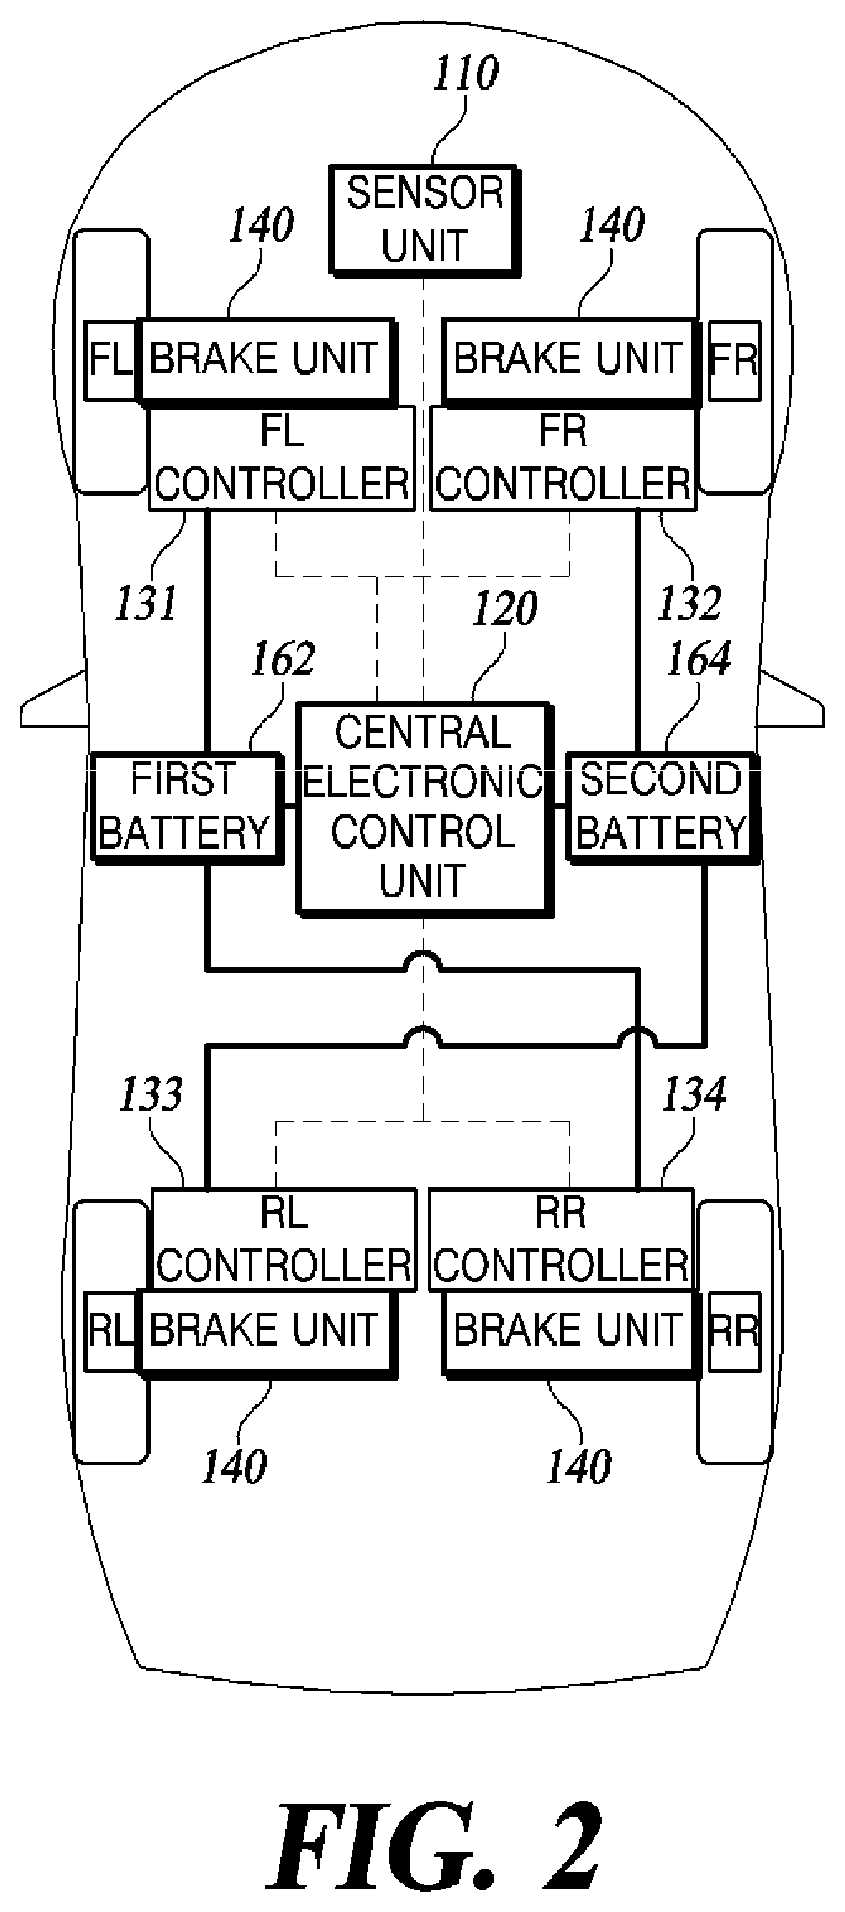 Electro-mechanical brake device and method of controlling the same